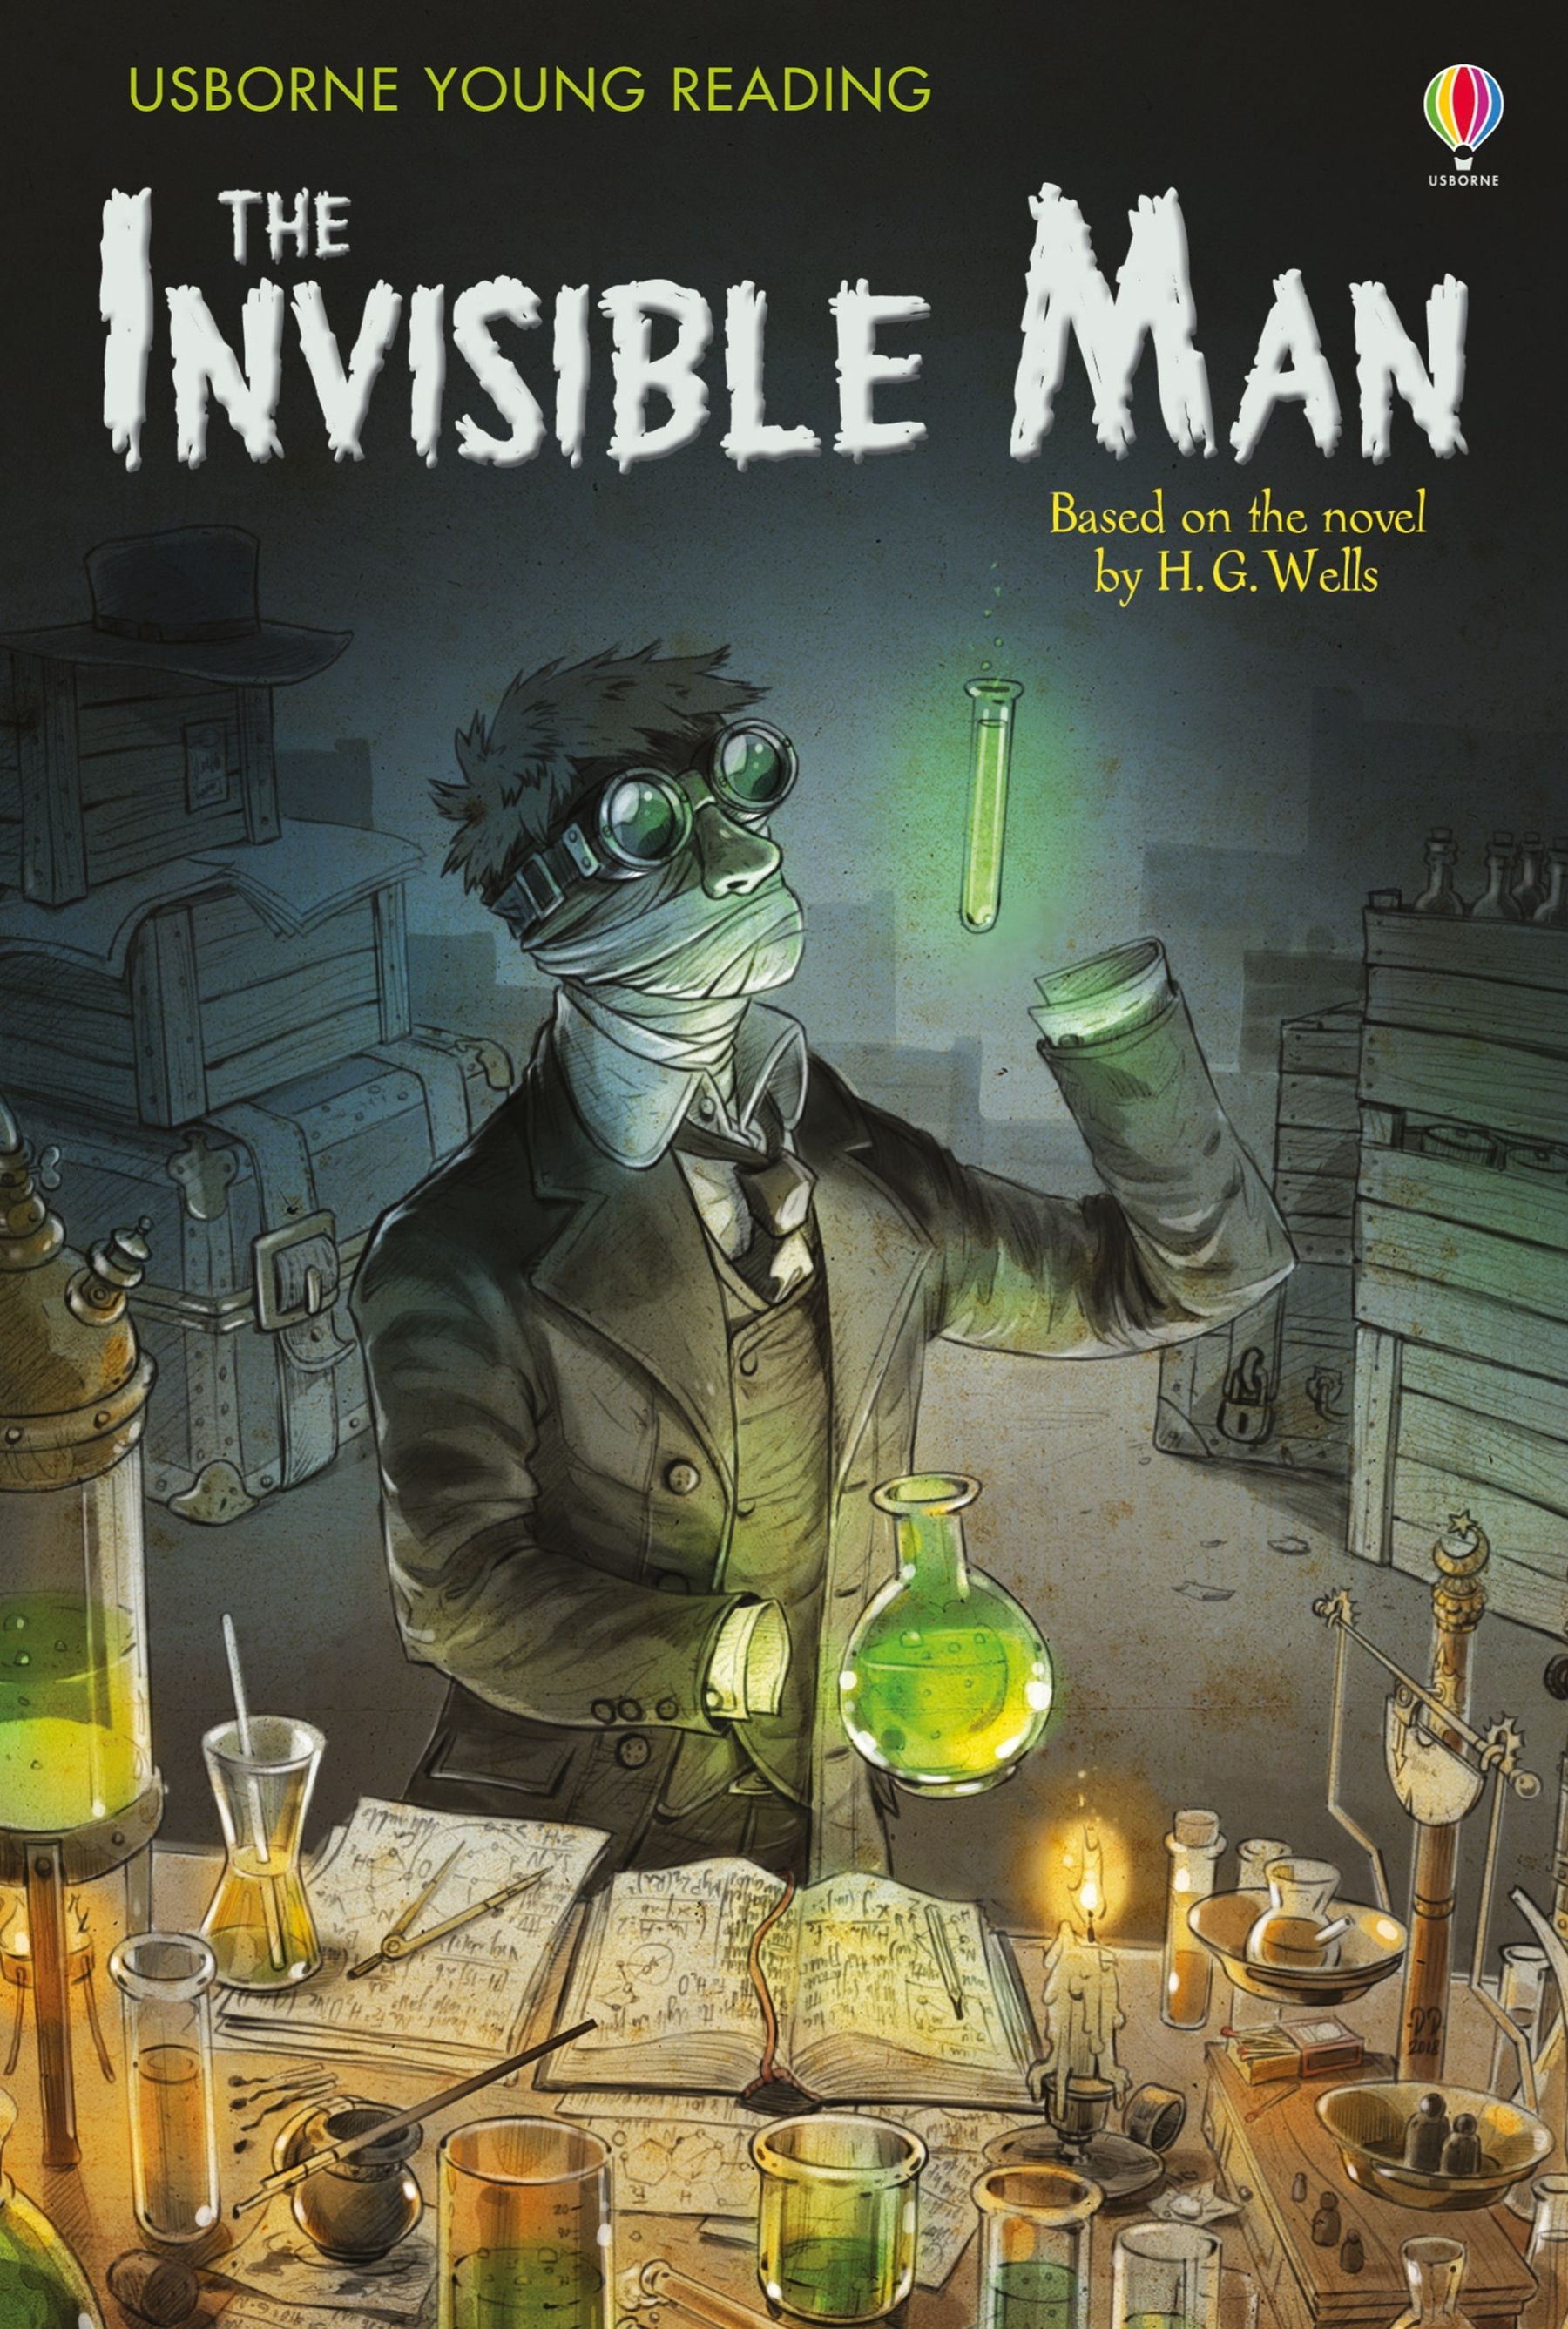 Usborne Young Reading: The Invisible Man